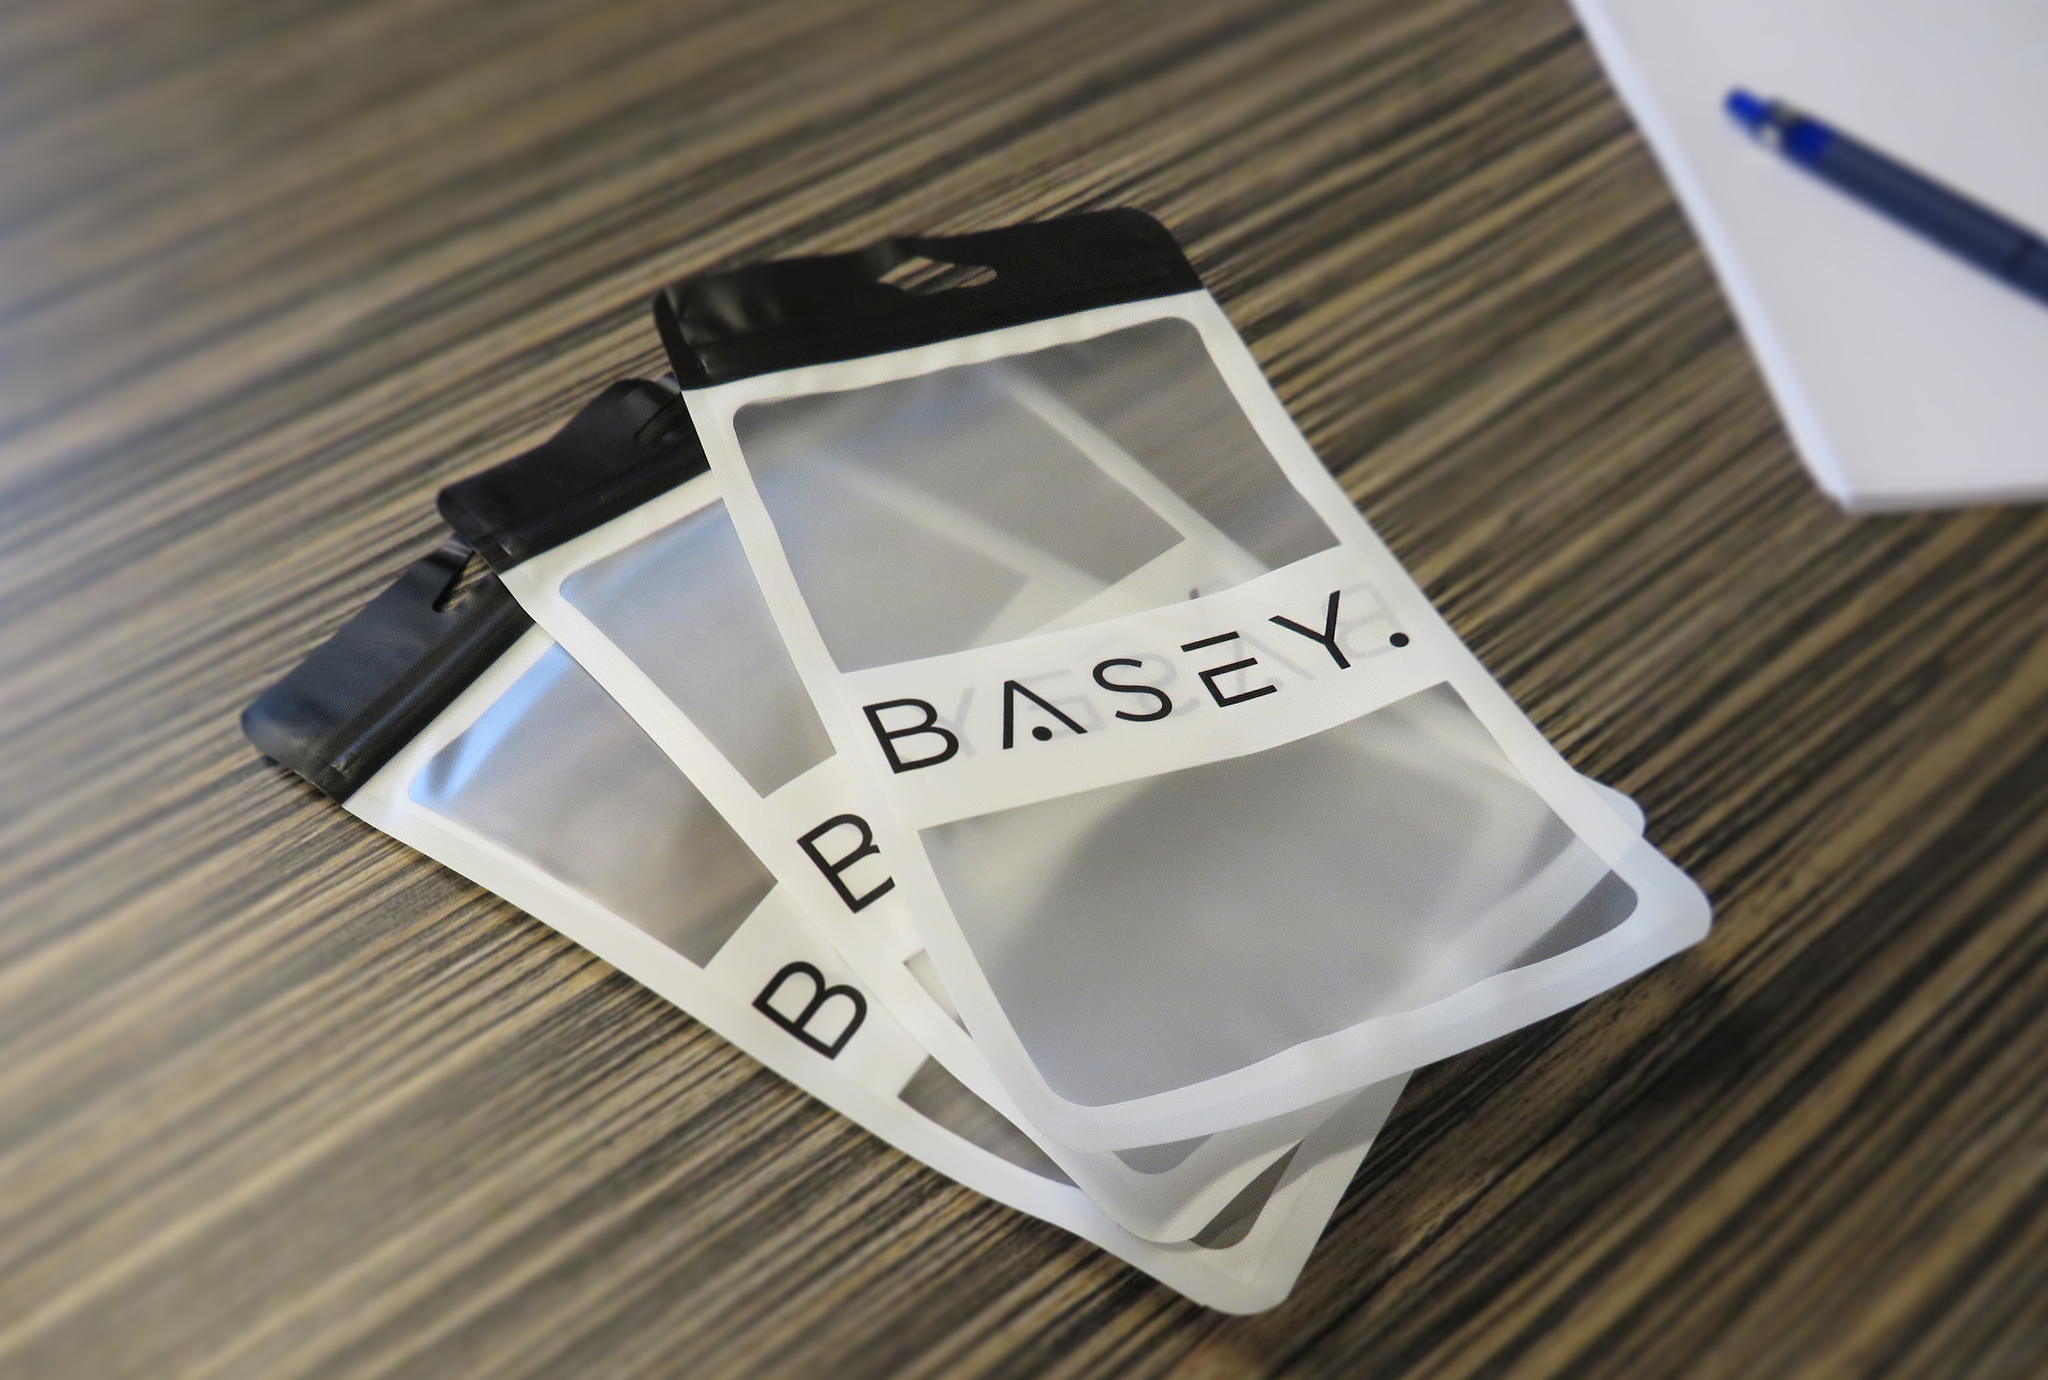 BASEY. OPPO A17 Screenprotector Tempered Glass - OPPO A17 Beschermglas Screen Protector Glas